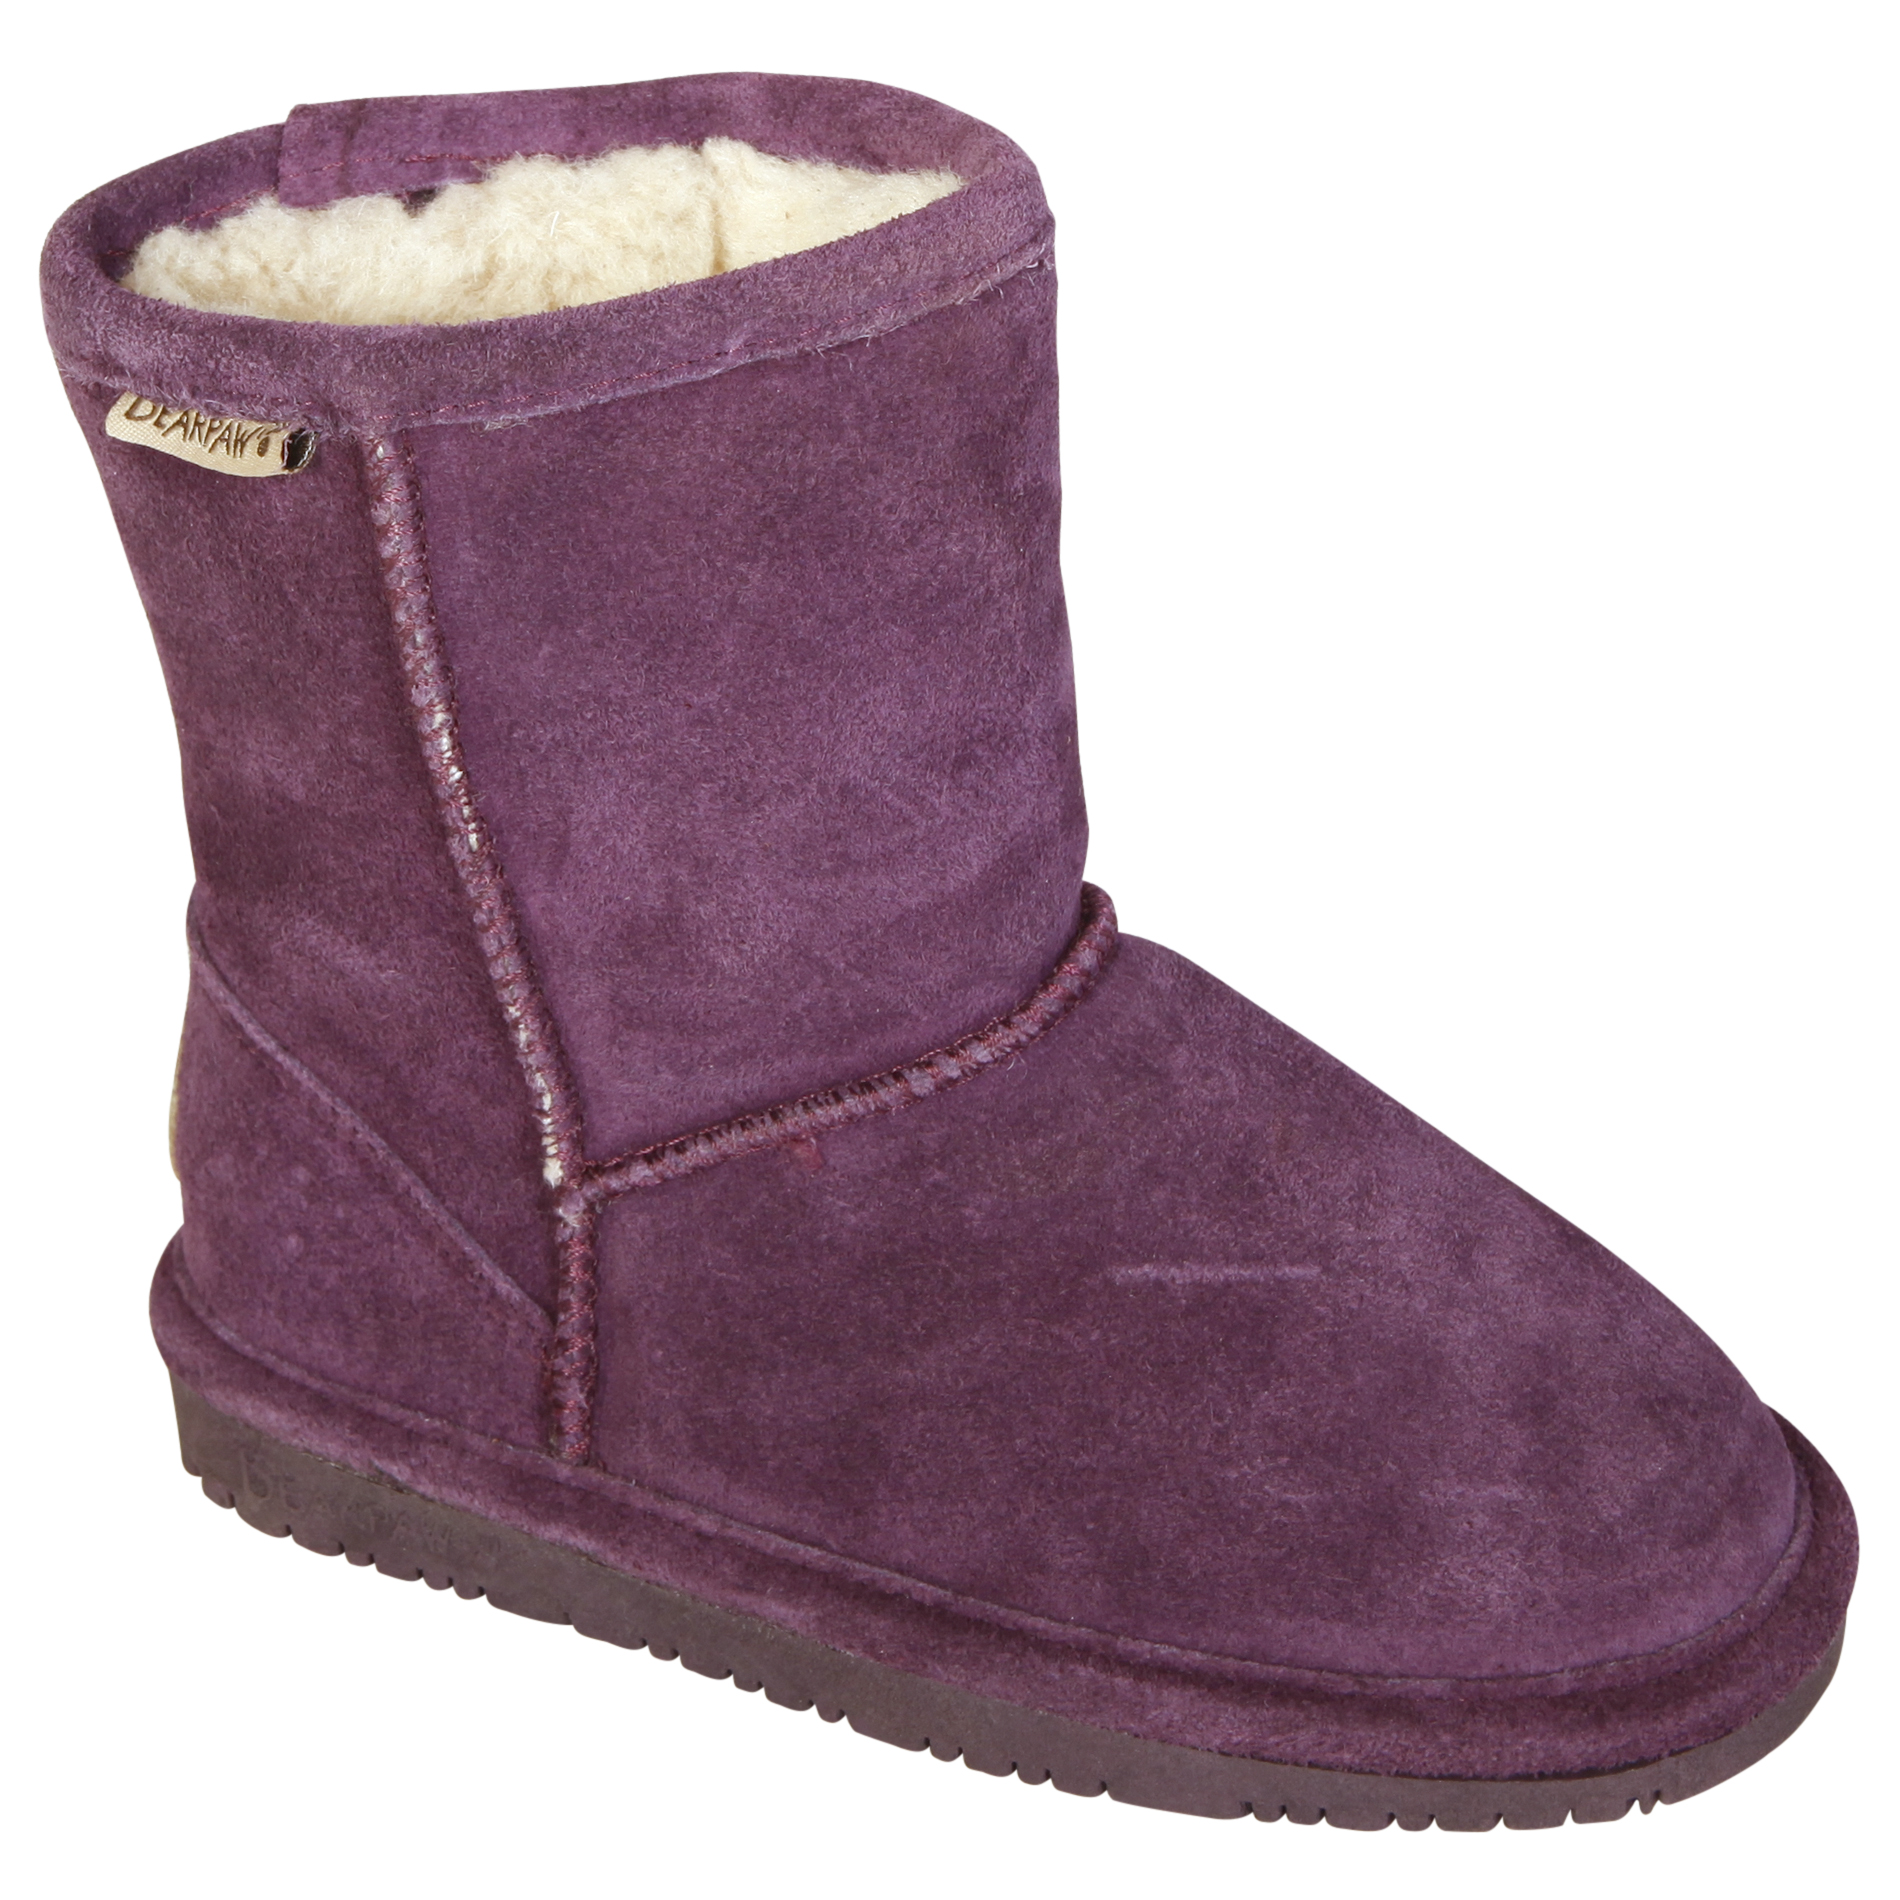 Bear Paw Toddler Girl's Emma Suede Fashion Boot - Violet